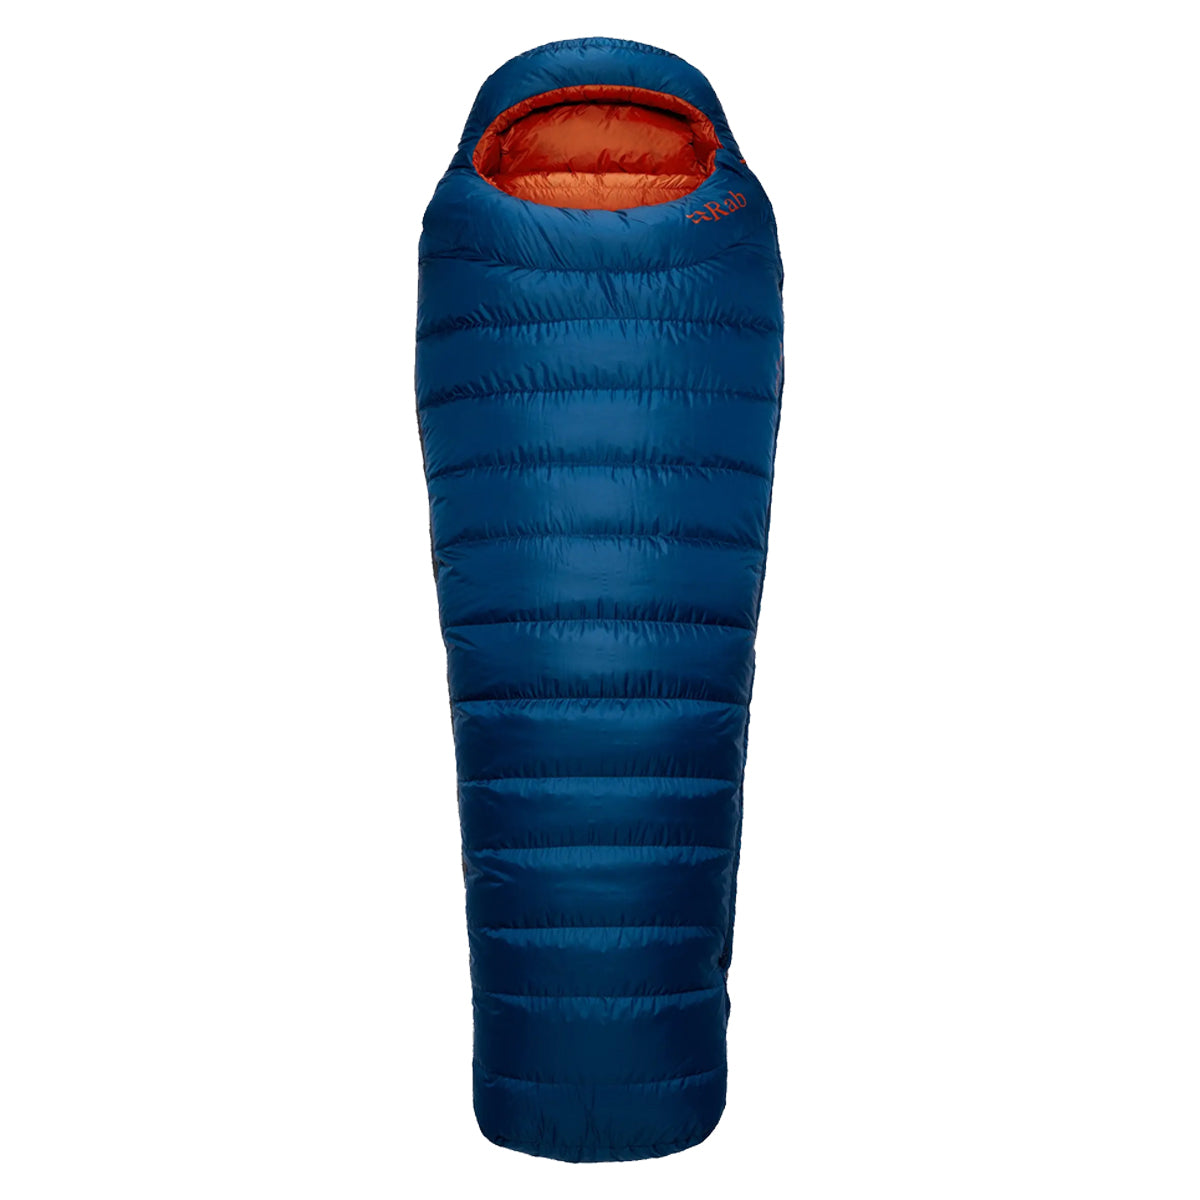 Rab Ascent 700 Down Sleeping Bag in  by GOHUNT | Rab - GOHUNT Shop